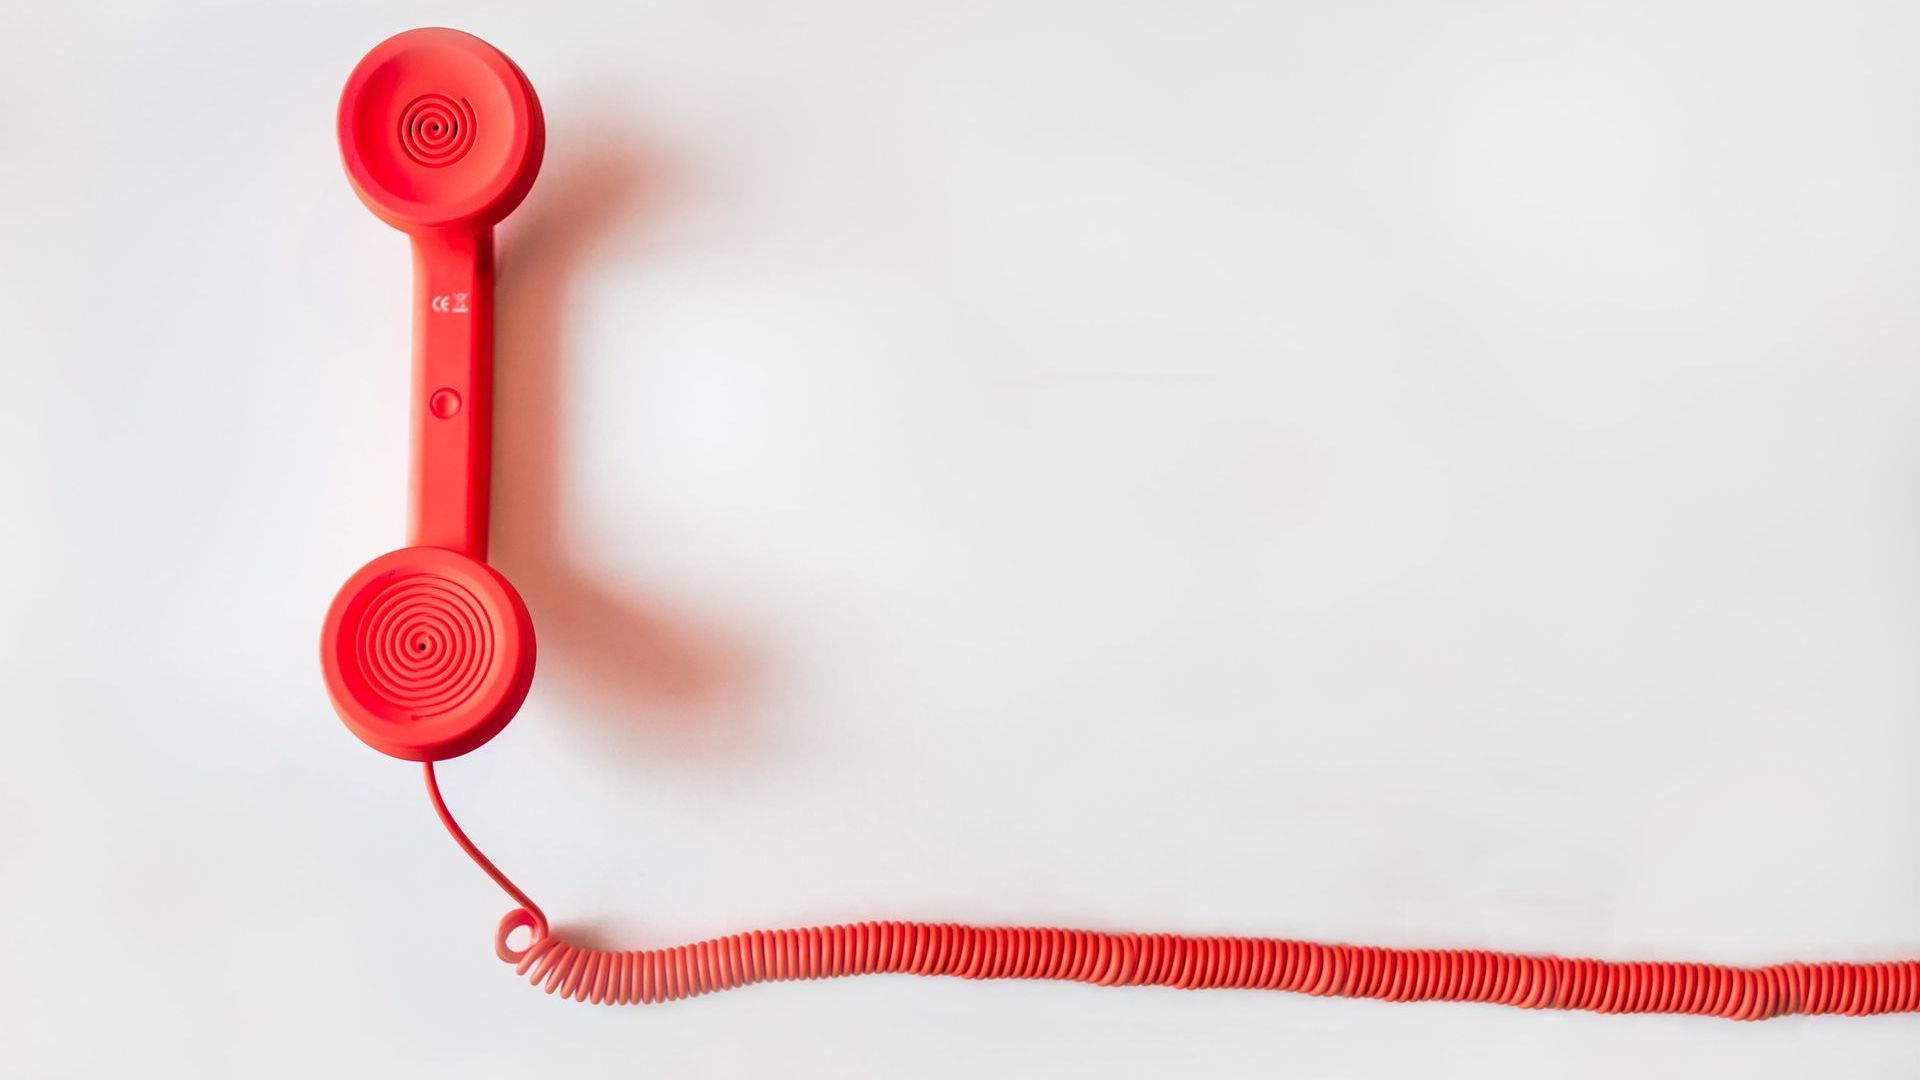 A red telephone with a red cord on a white background.